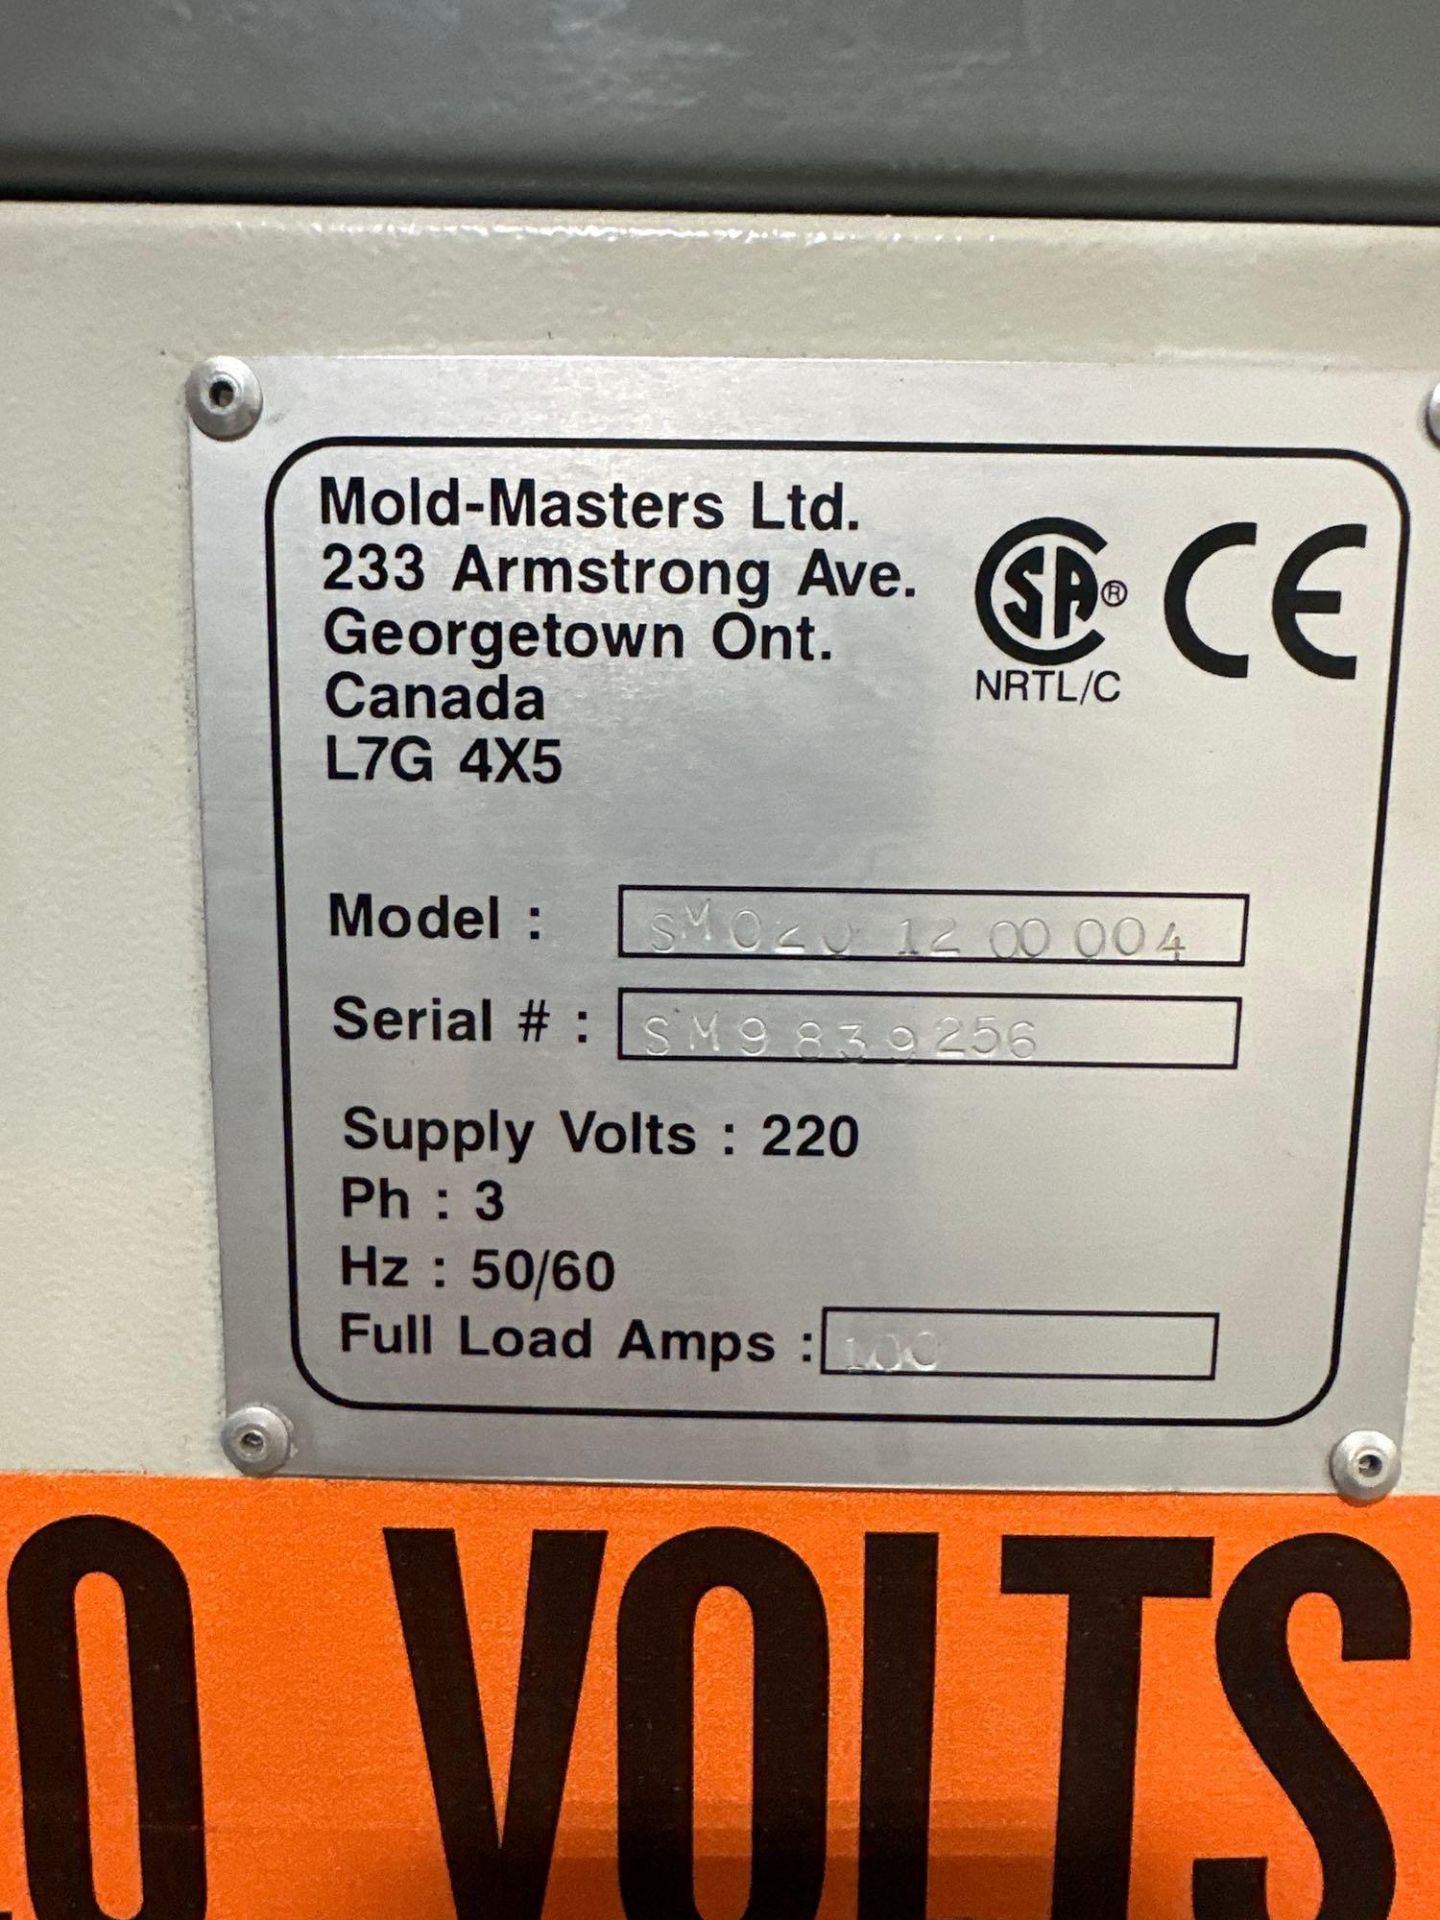 Mold Masters SM020 12 00 004 Hot Runner Control, s/n SM9839256 - Image 8 of 8